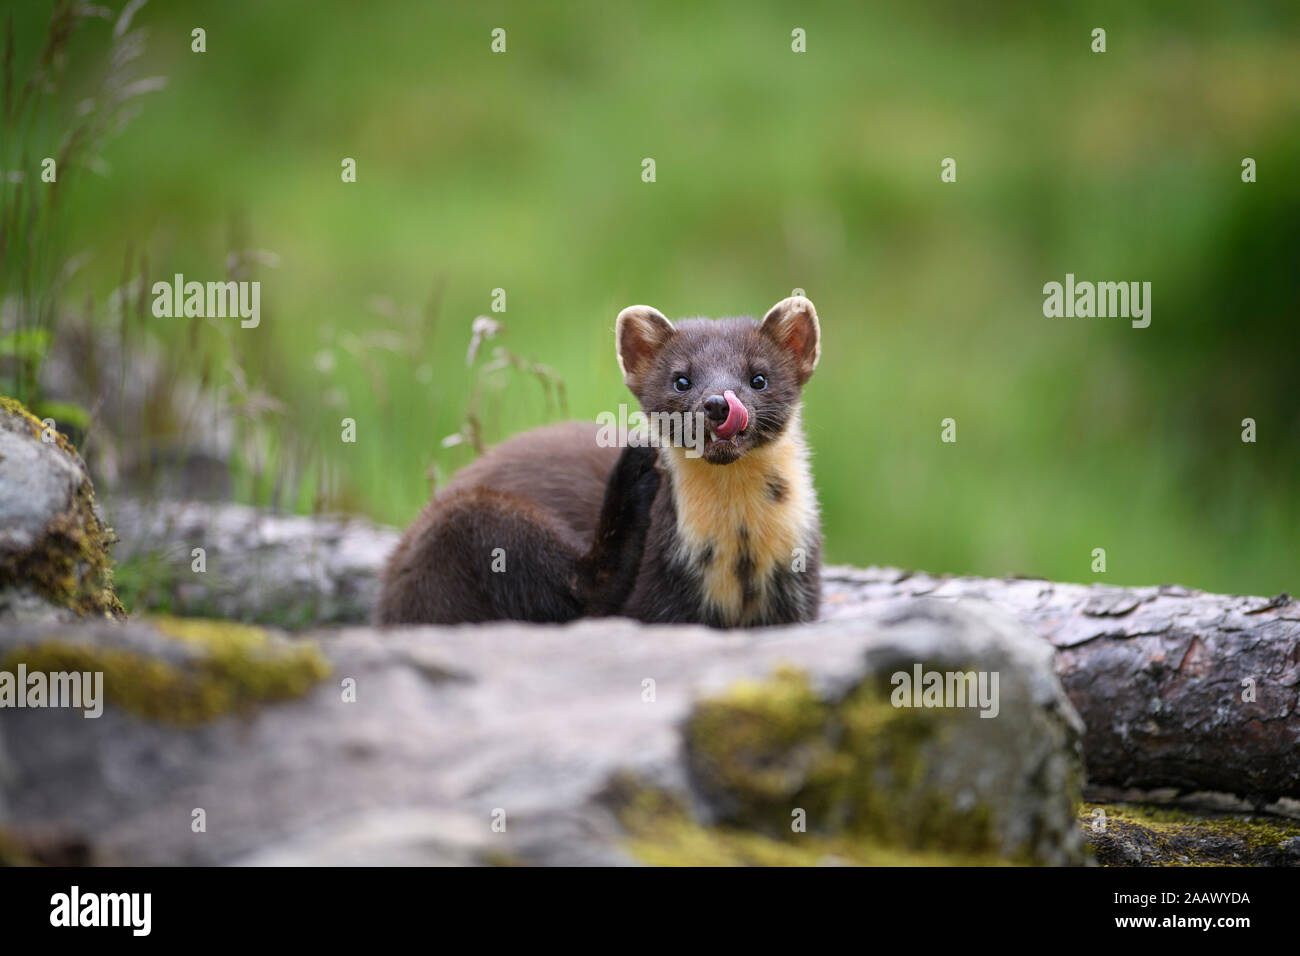 Close-up portrait of cute pine marten sticking out tongue on log Stock Photo